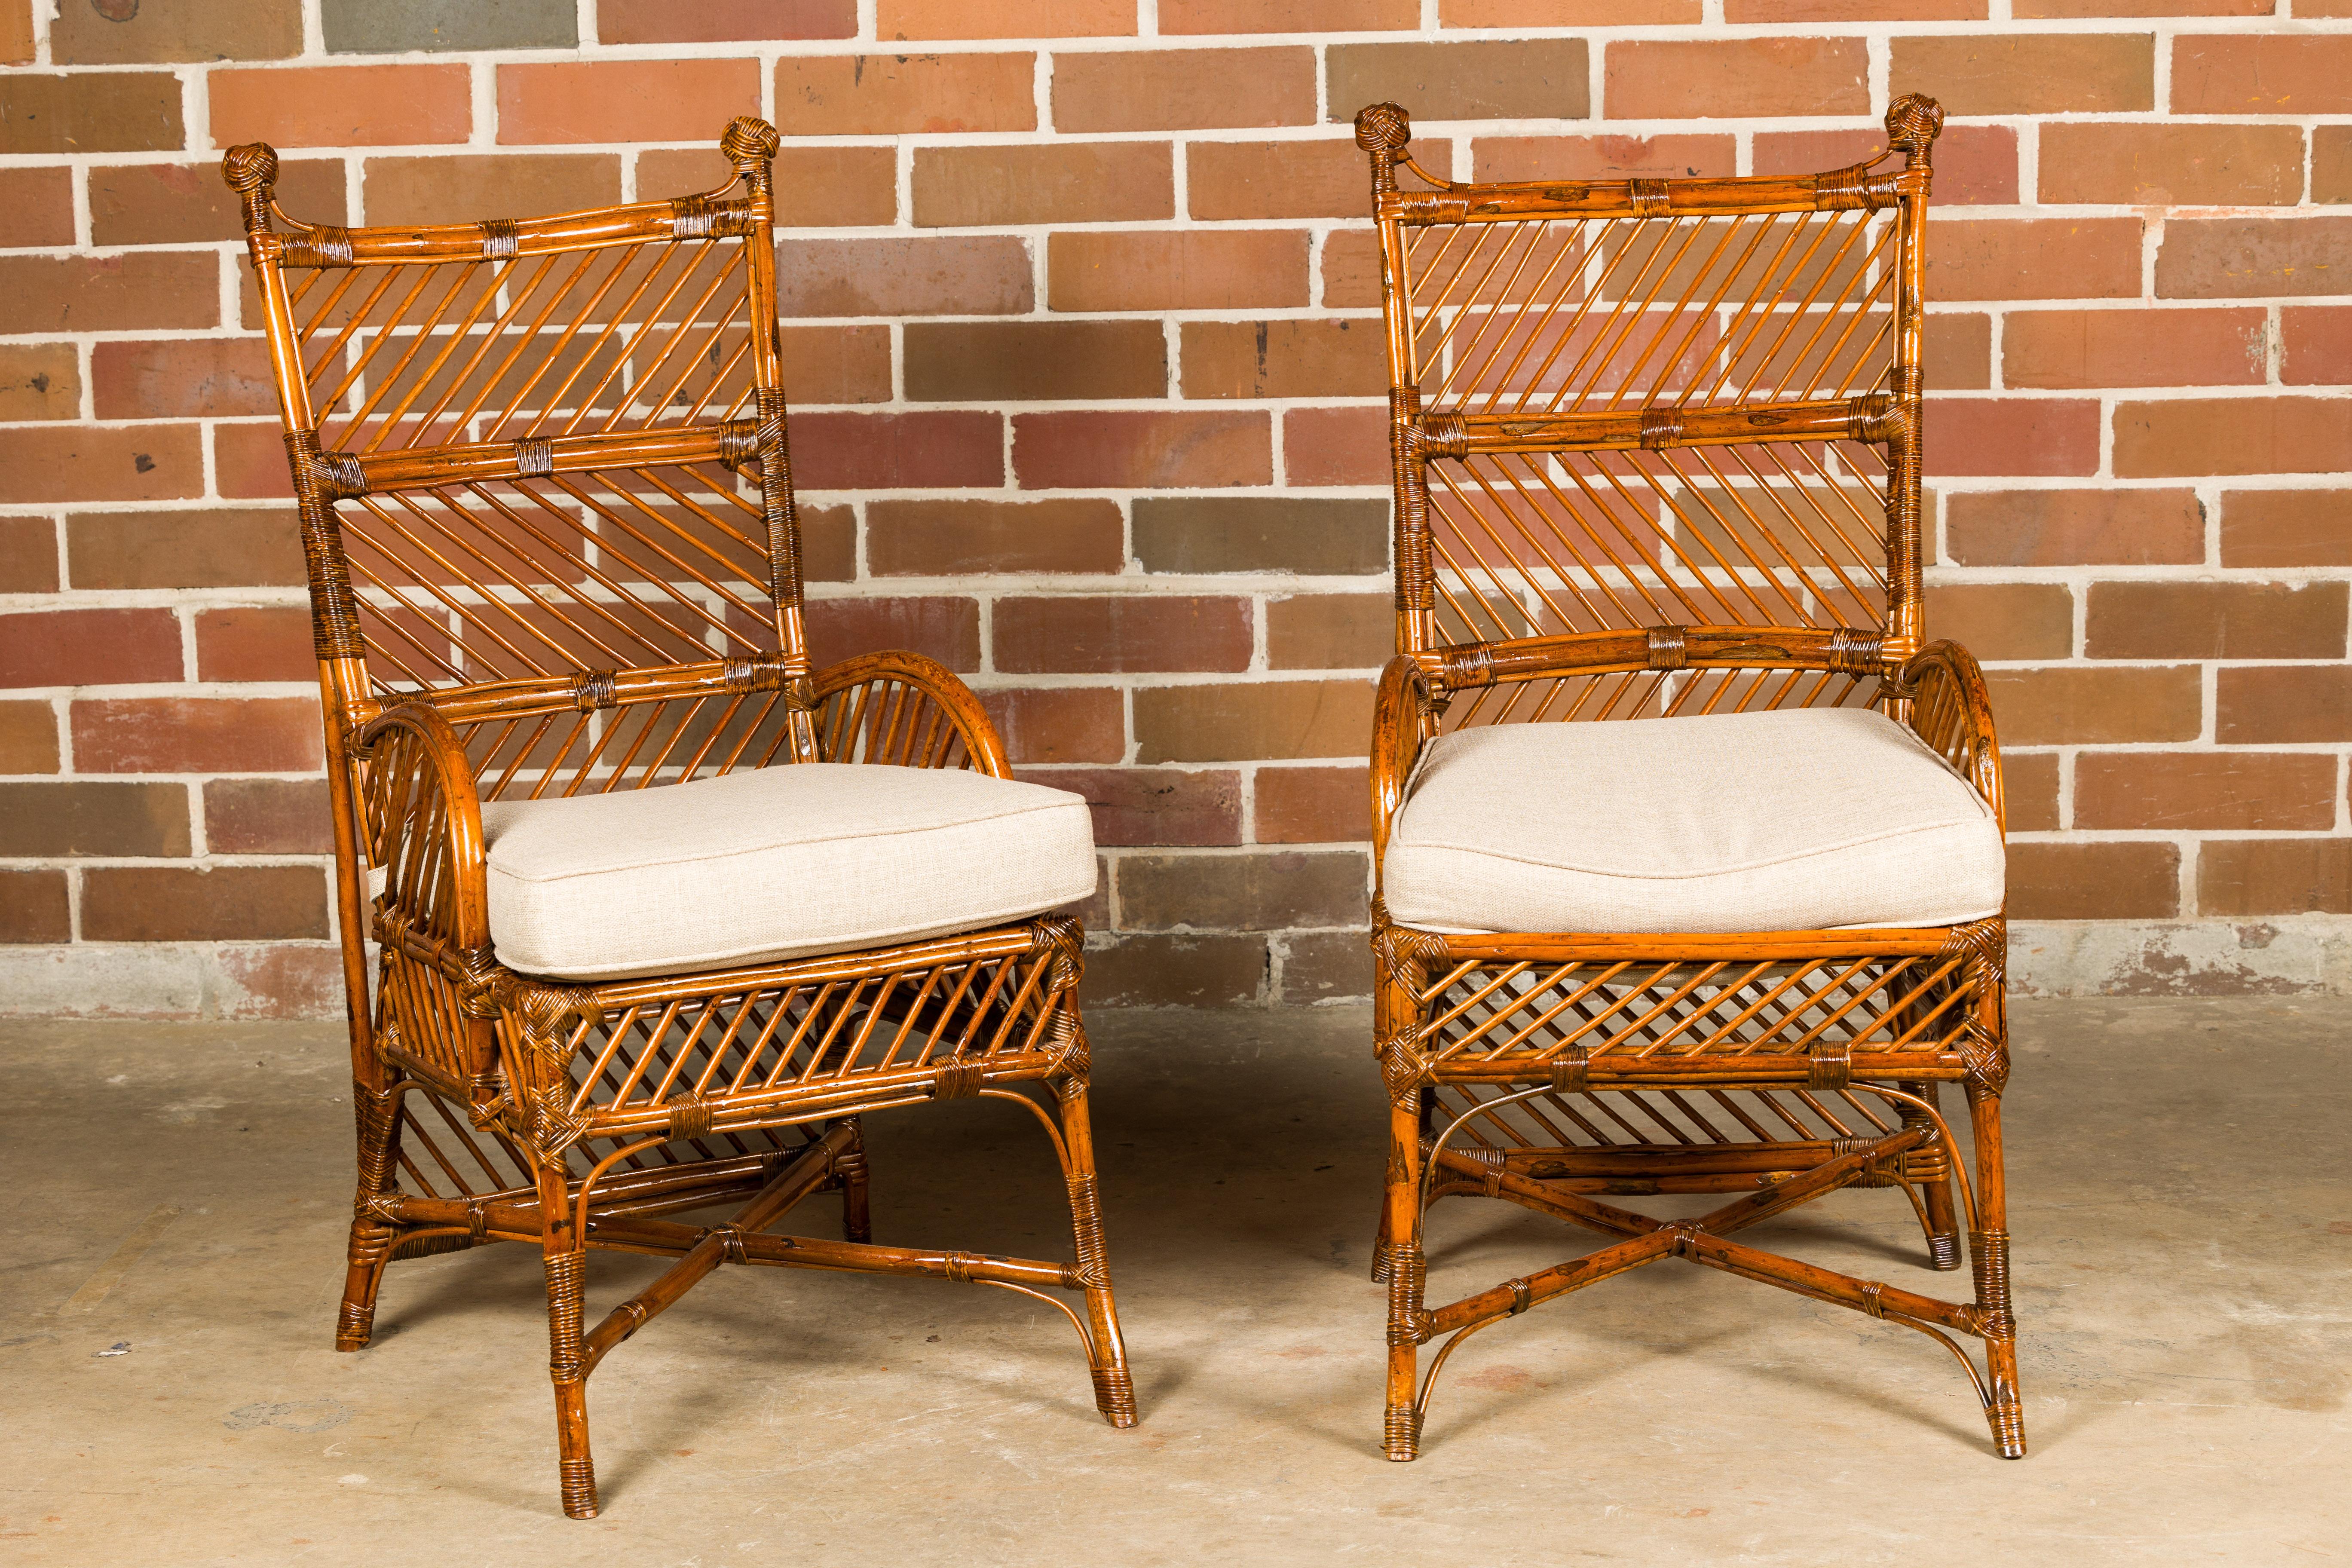 A pair of English bamboo and rattan chairs from circa 1890-1920 with custom cushions. These exquisite English bamboo and rattan chairs, hailing from the late 19th to early 20th century, are a delightful fusion of vintage charm and tropical allure.